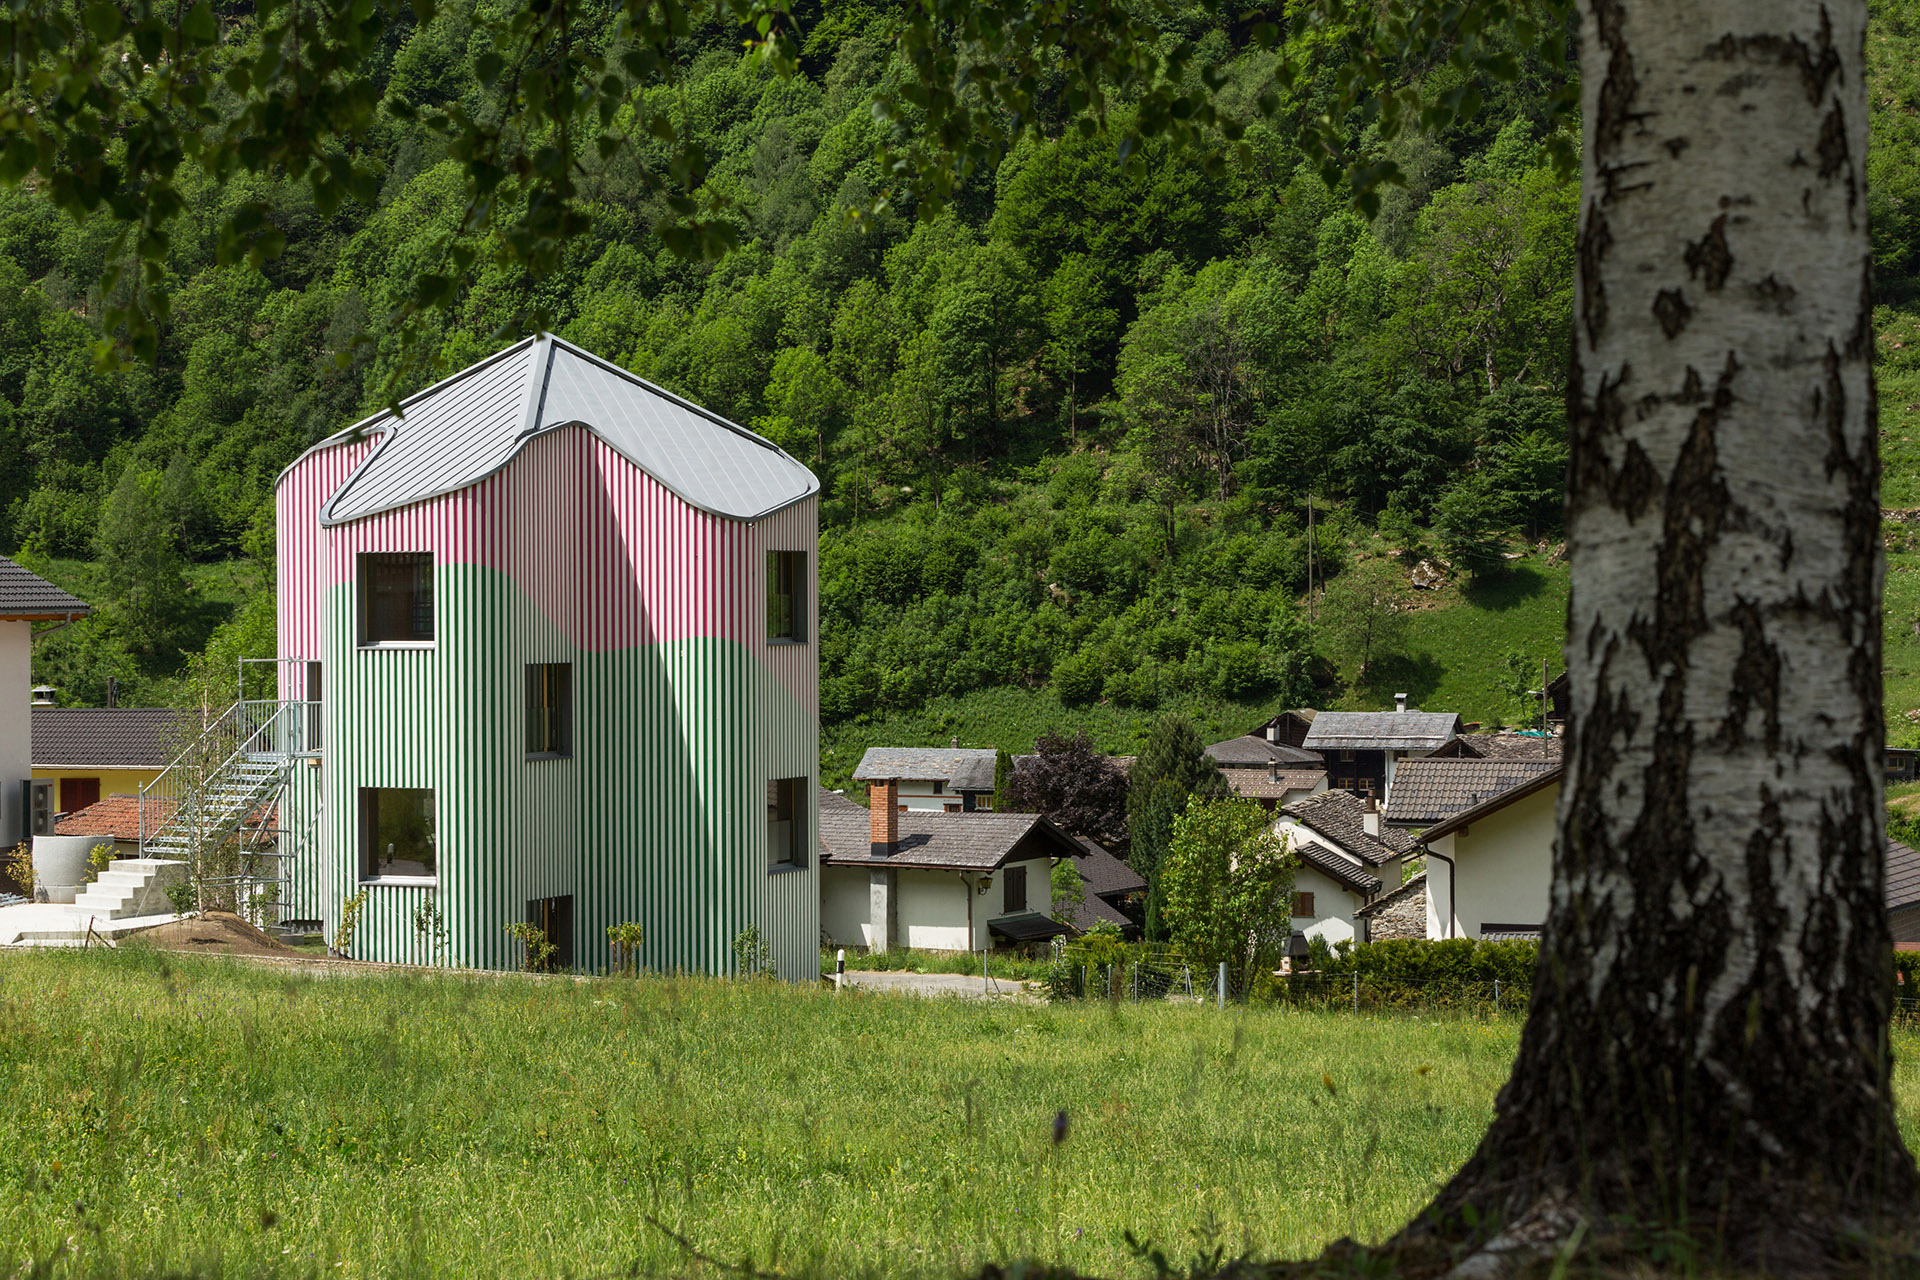 Dwelling designed as a living sculpture. A work on the borderline between art and architecture